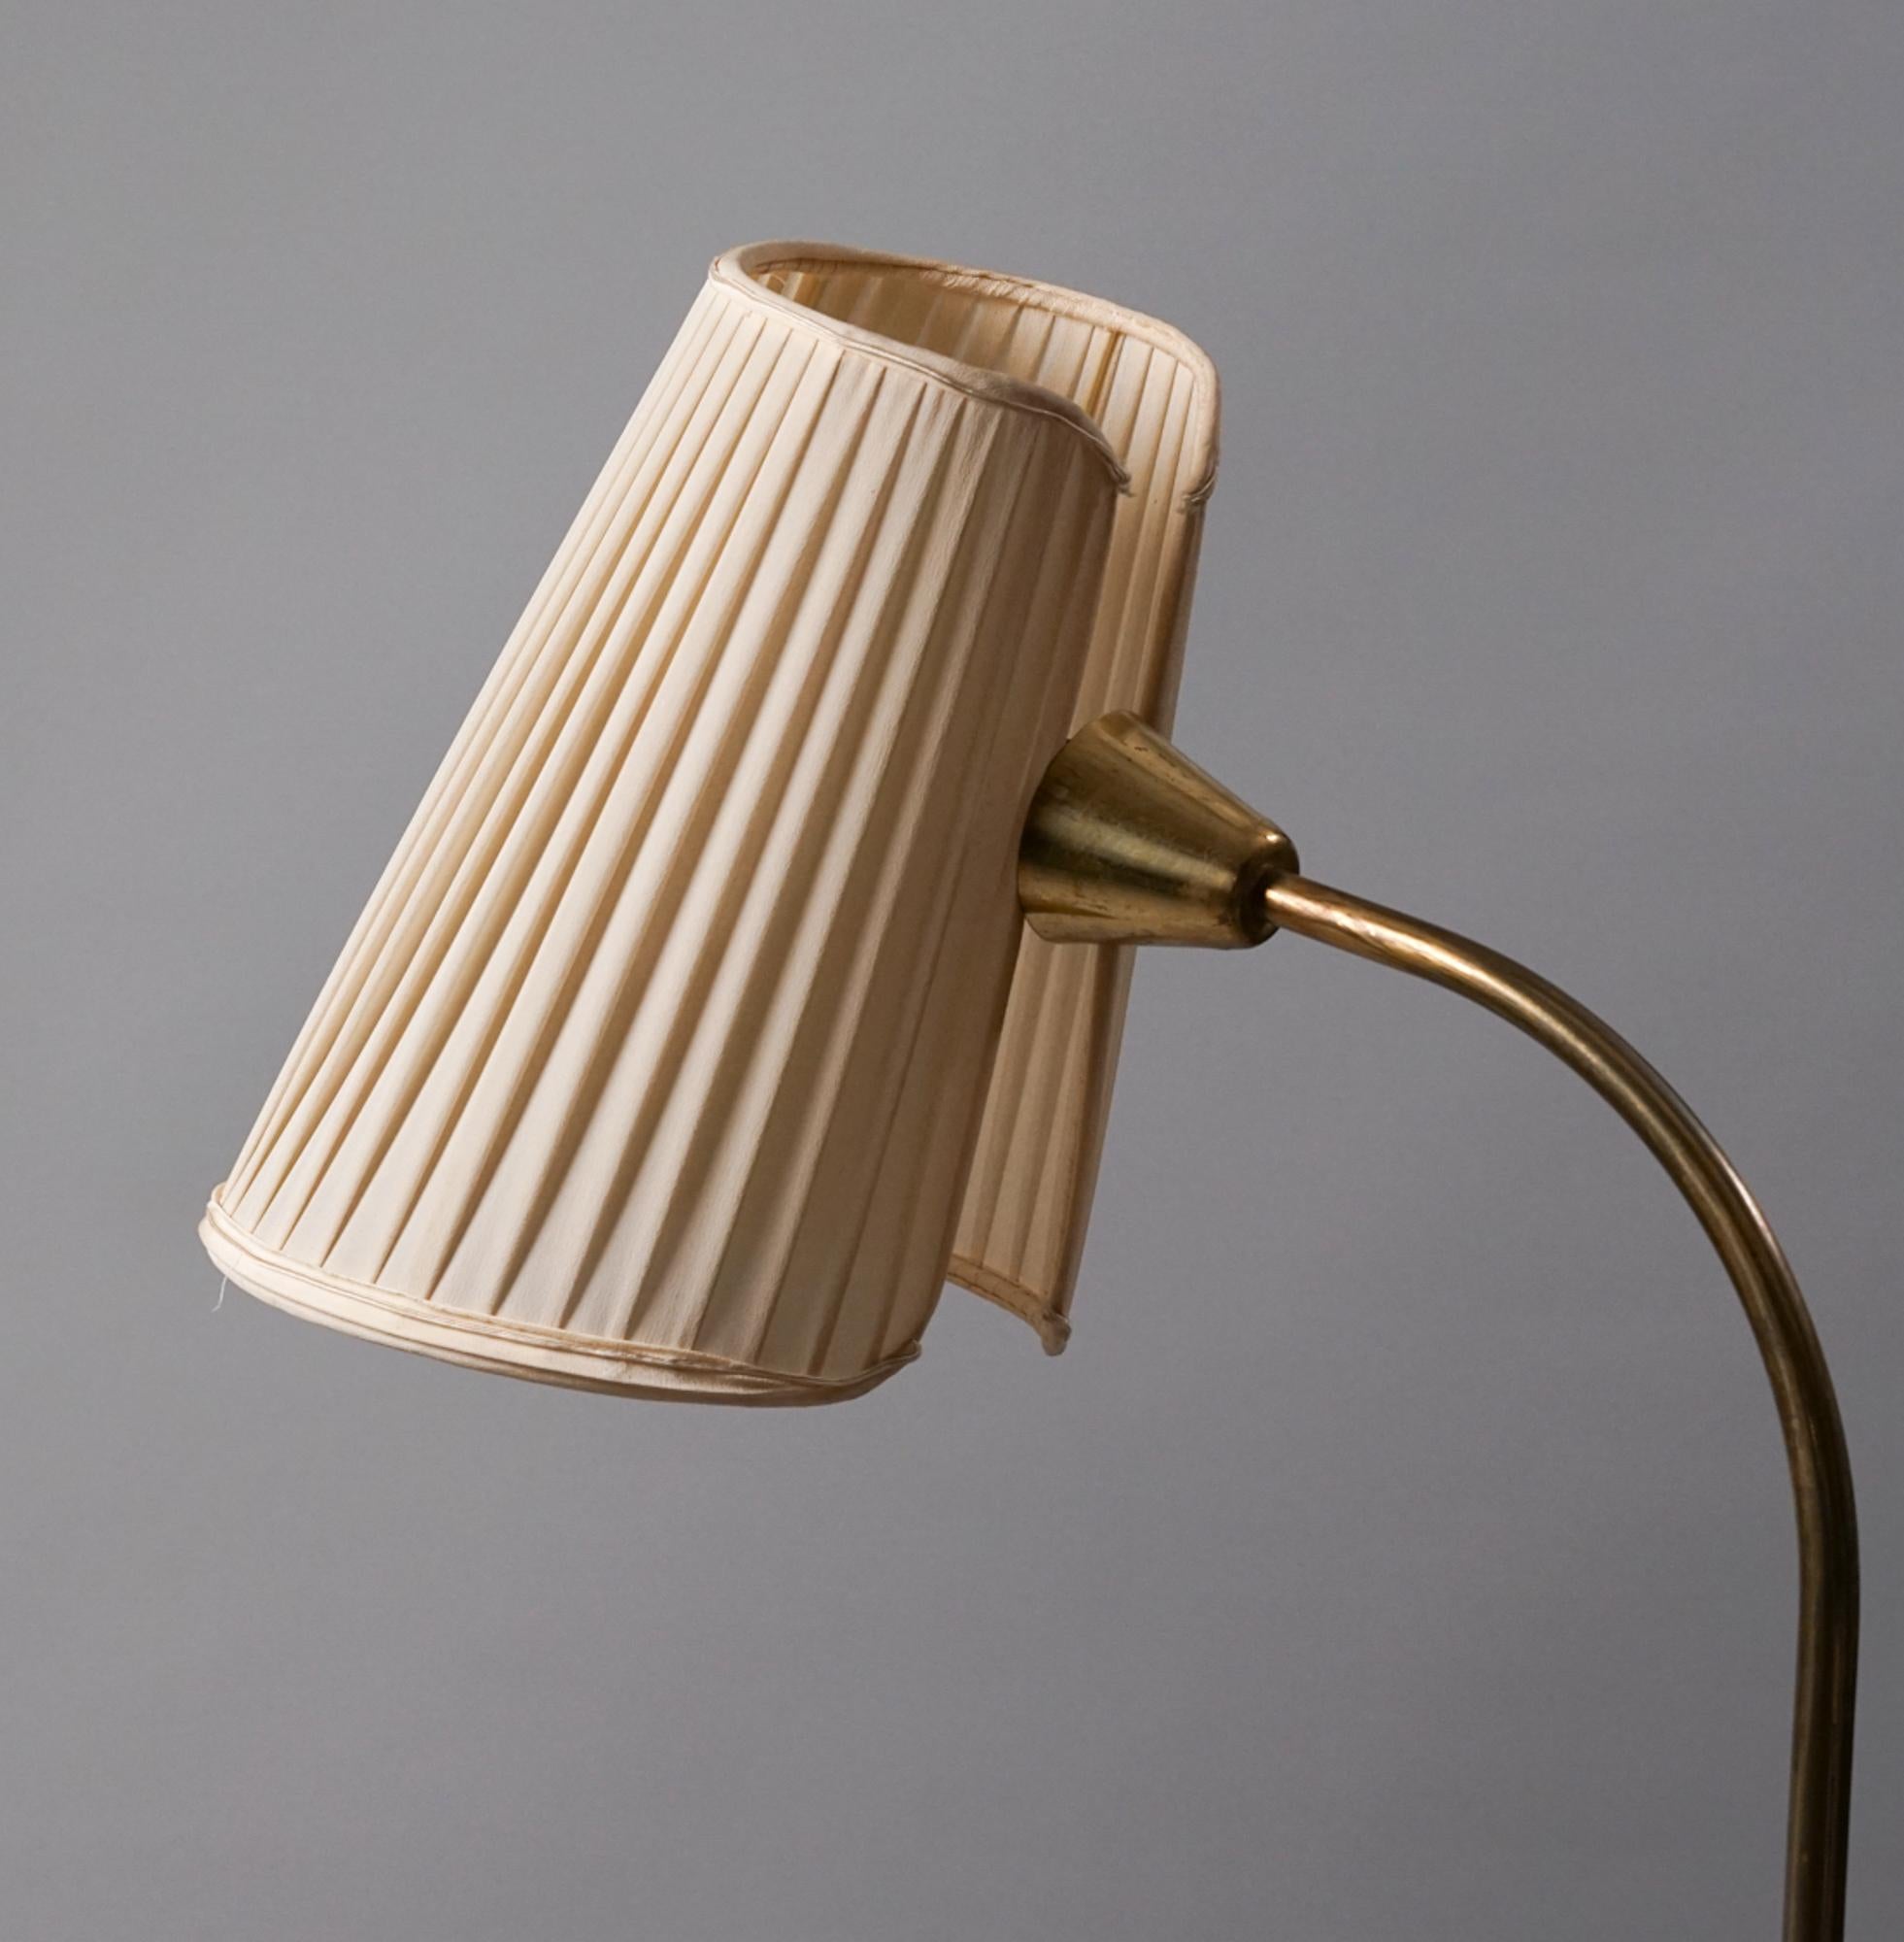 Scandinavian Modern floor lamp, manufactured by Stockmann/Orno Oy, 1950s. Brass with silk lampshade. Good vintage condition, minor patina consistent with age and use. Beautiful minimalistic design. 